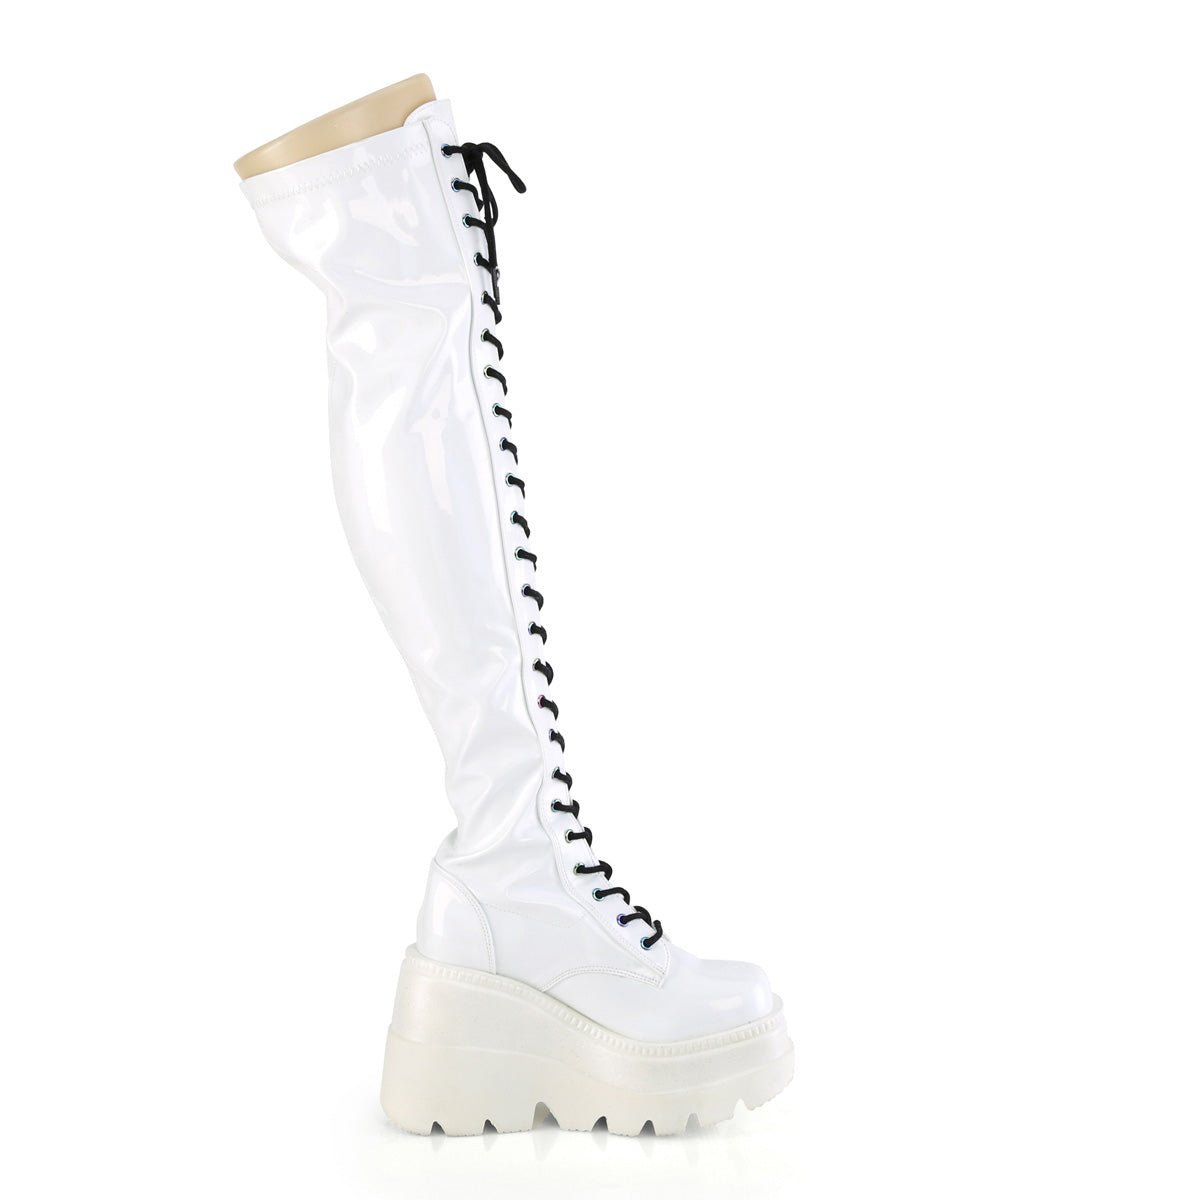 Too Fast | Demonia Shaker 374 | White Hologram Stretch Patent Leather Women&#39;s Over The Knee Boots